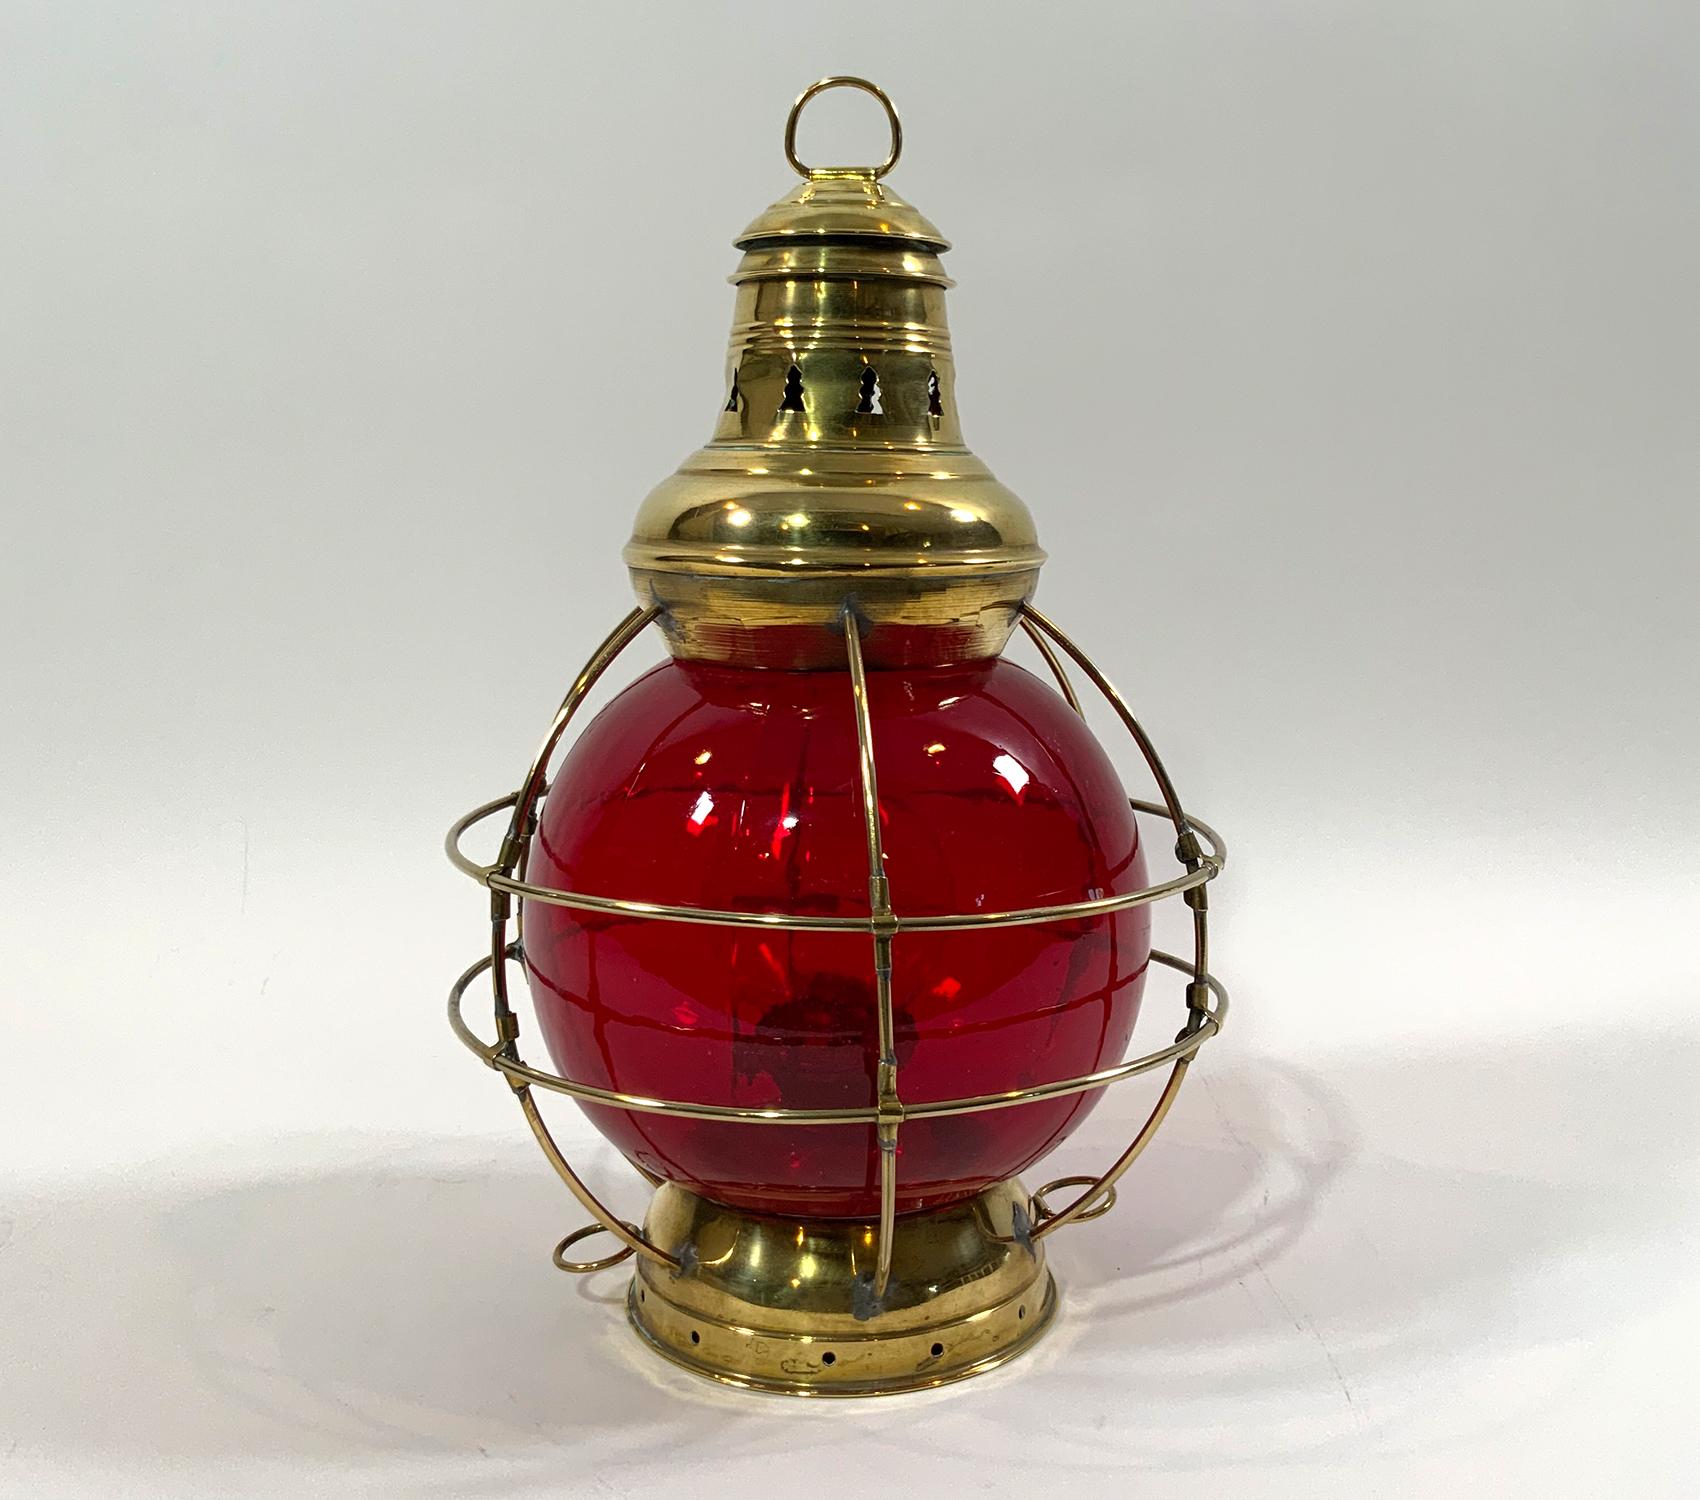 Solid brass Perkins eight-inch onion lamp with red lens. Highly polished. Oil burner with wick, tank, and glass chimney. Nice unit. Highly polished finish. With oil burner and glass chimney. 

Weight: 4 LBS
Overall Dimensions: 15” H x 10